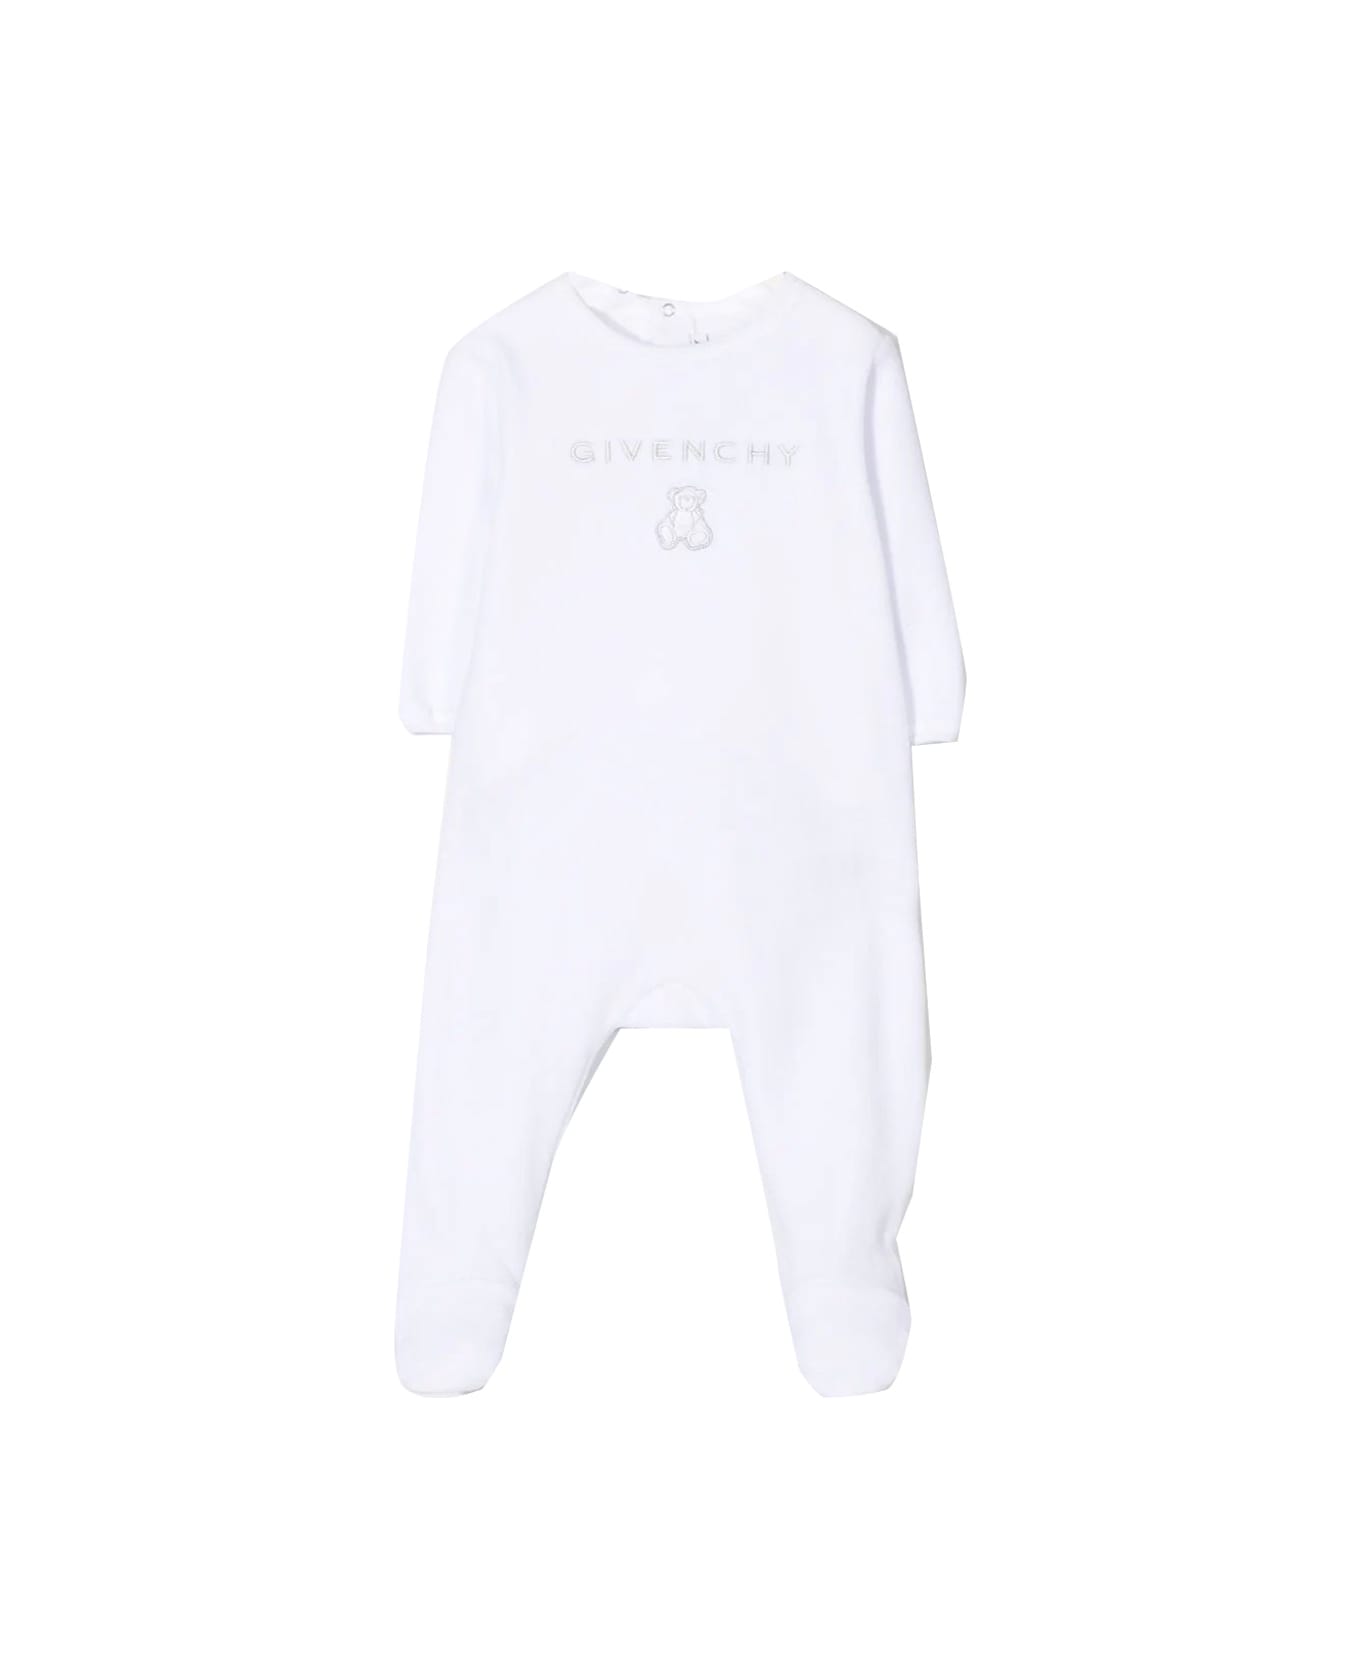 Givenchy Cotton Romper - White アクセサリー＆ギフト